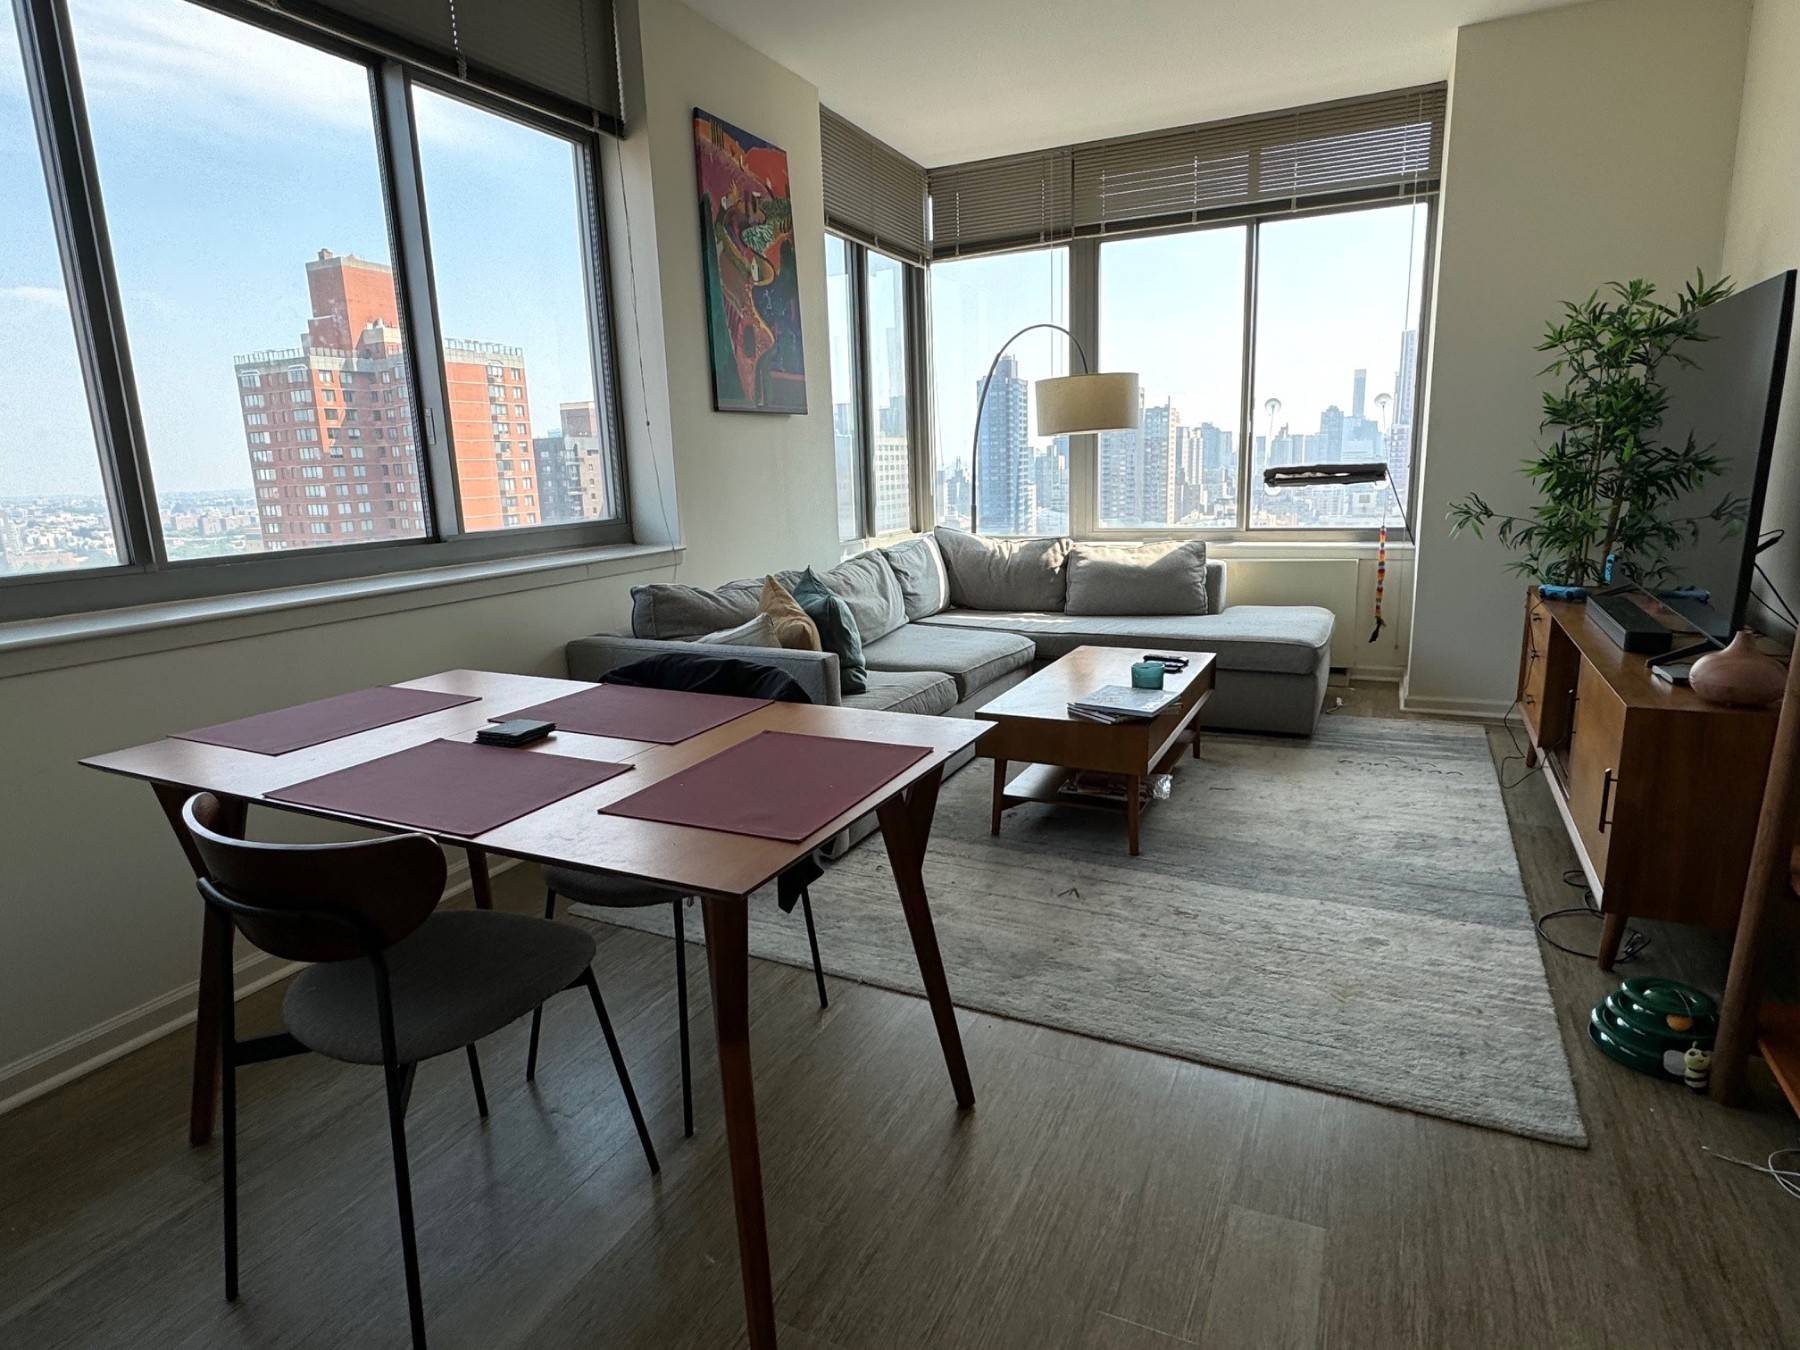 Imagine waking up every morning to breathtaking, unobstructed river and city views from the comfort of your own corner windows, with double exposure to soak up the natural light.